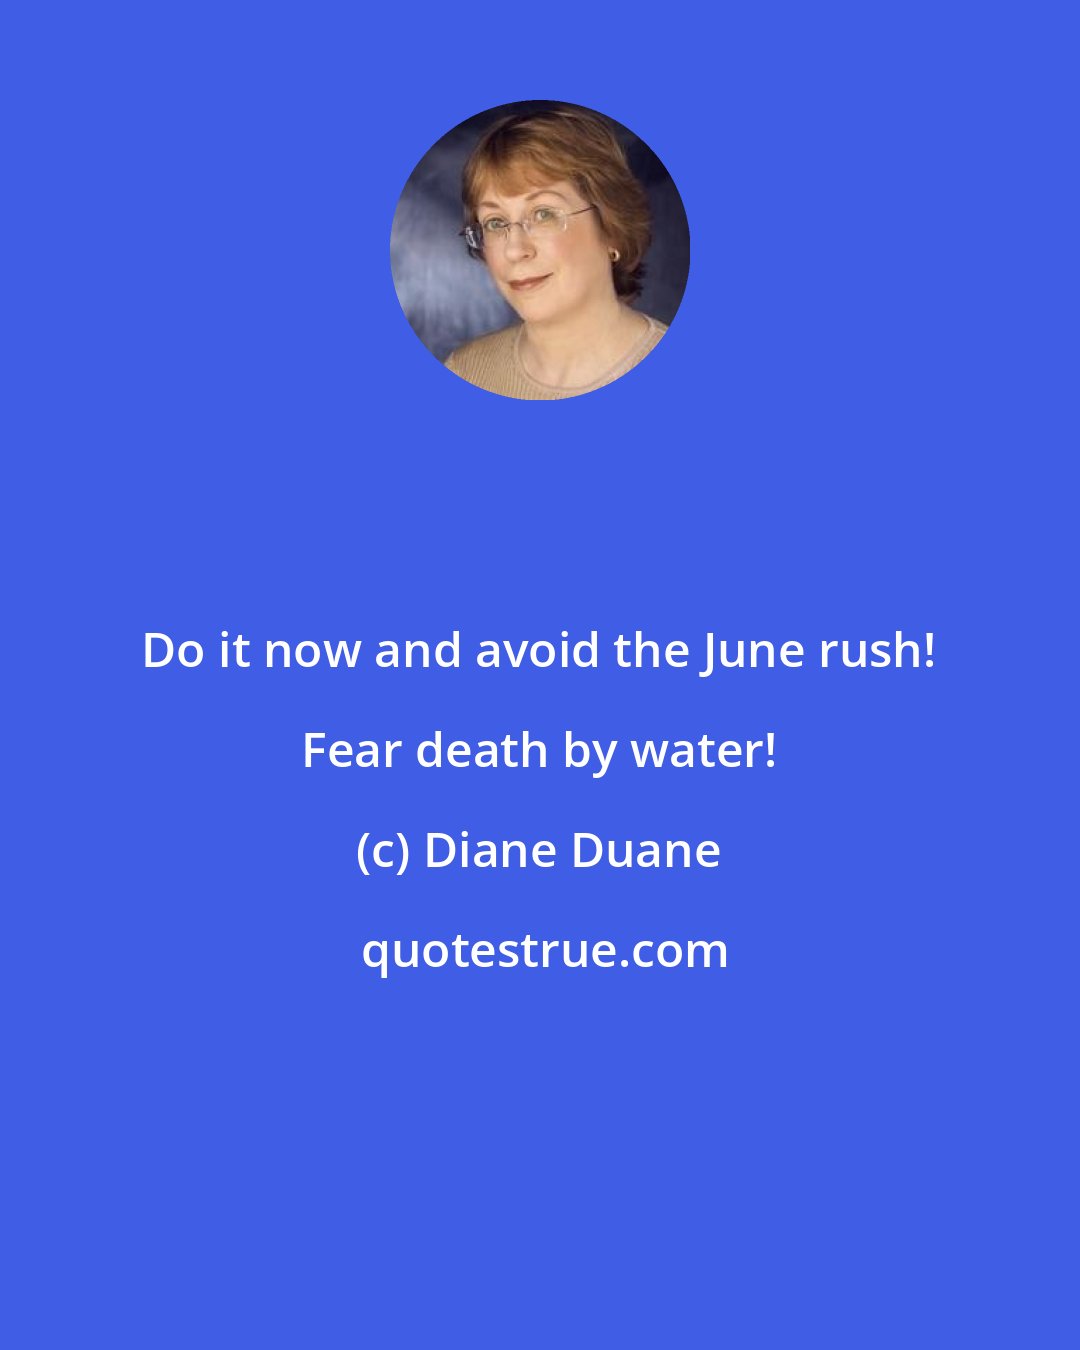 Diane Duane: Do it now and avoid the June rush! Fear death by water!